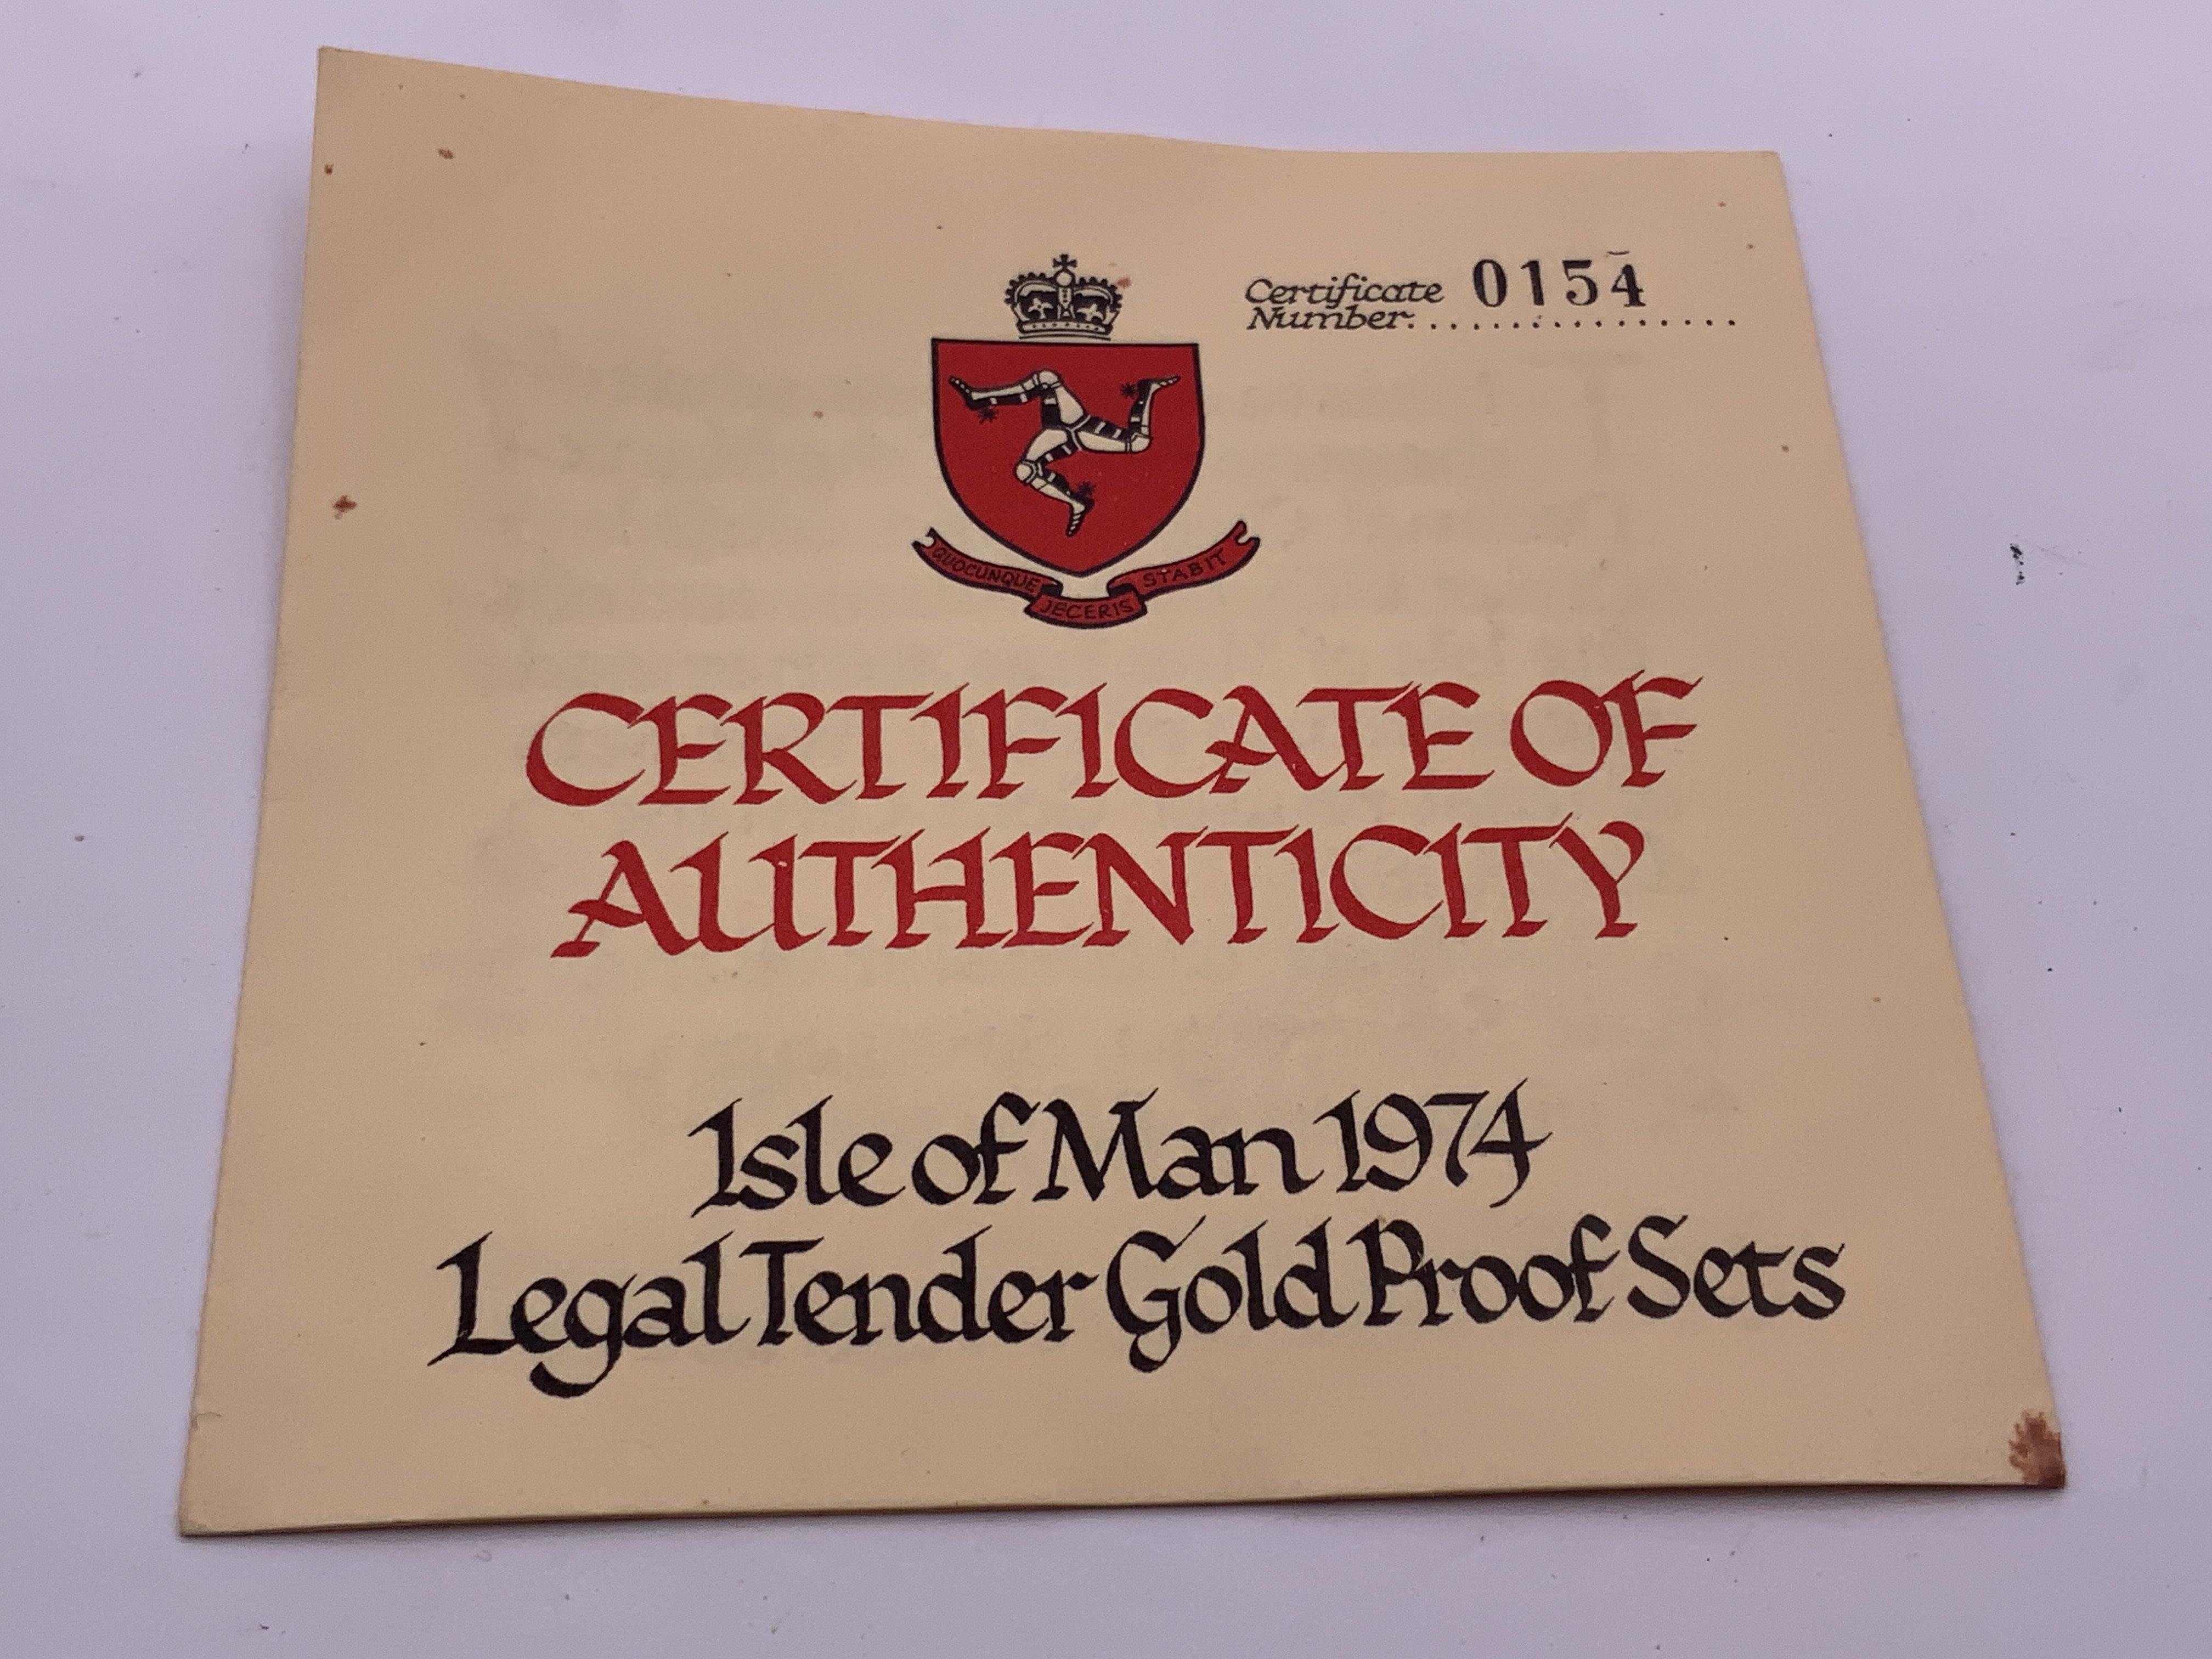 A 1974 Pobjoy Mint Isle of Man gold proof coin set